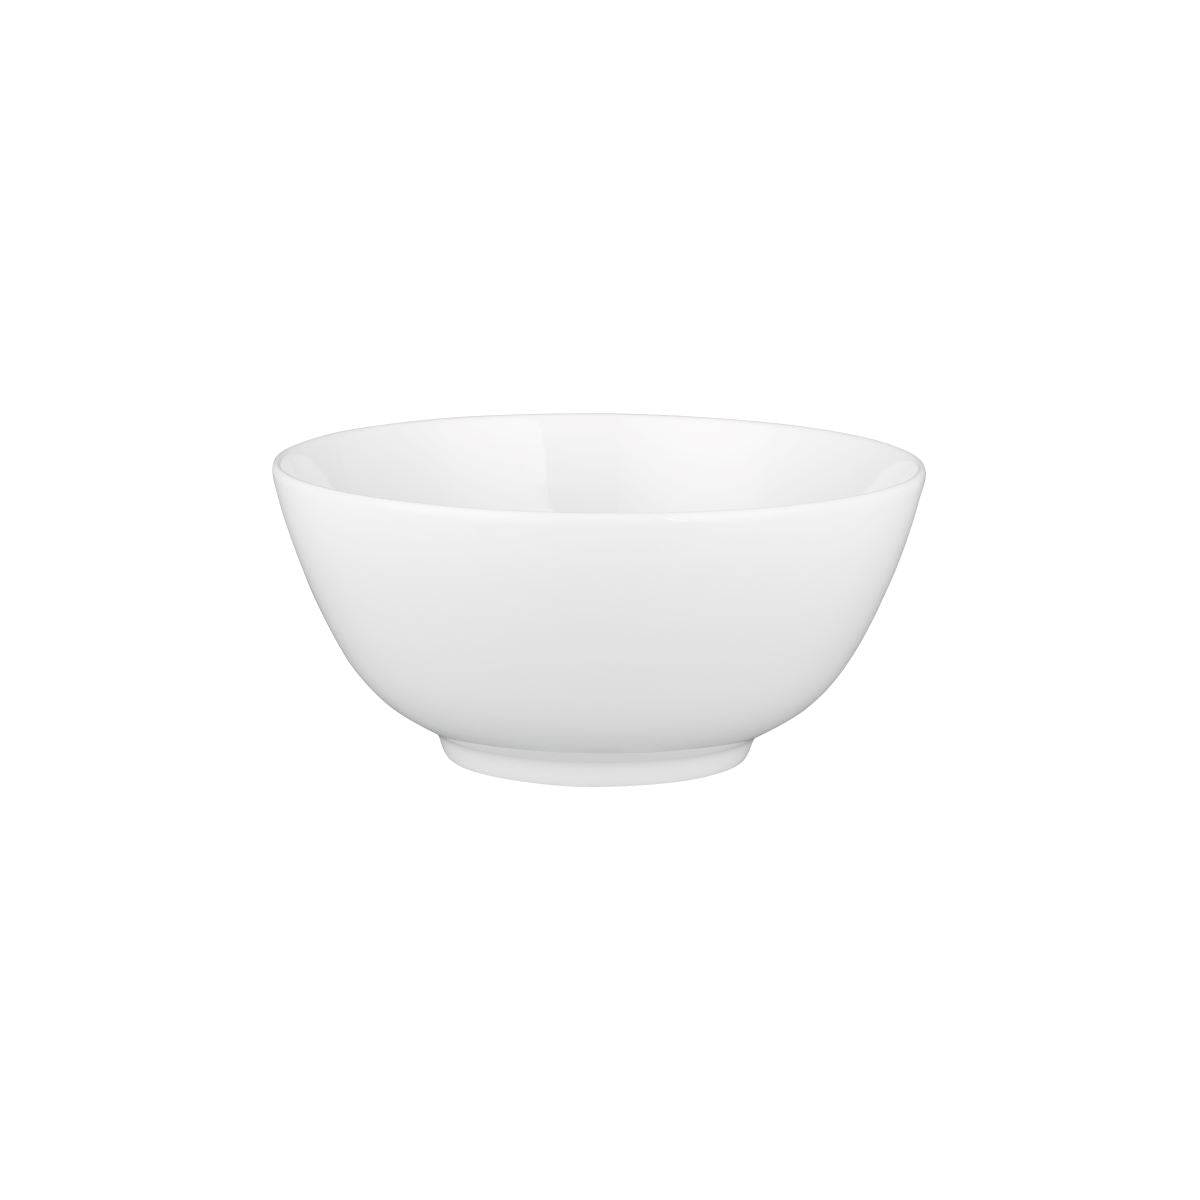 Noodle Bowl - 150Mm, Pacific Bone China: Pack of 24